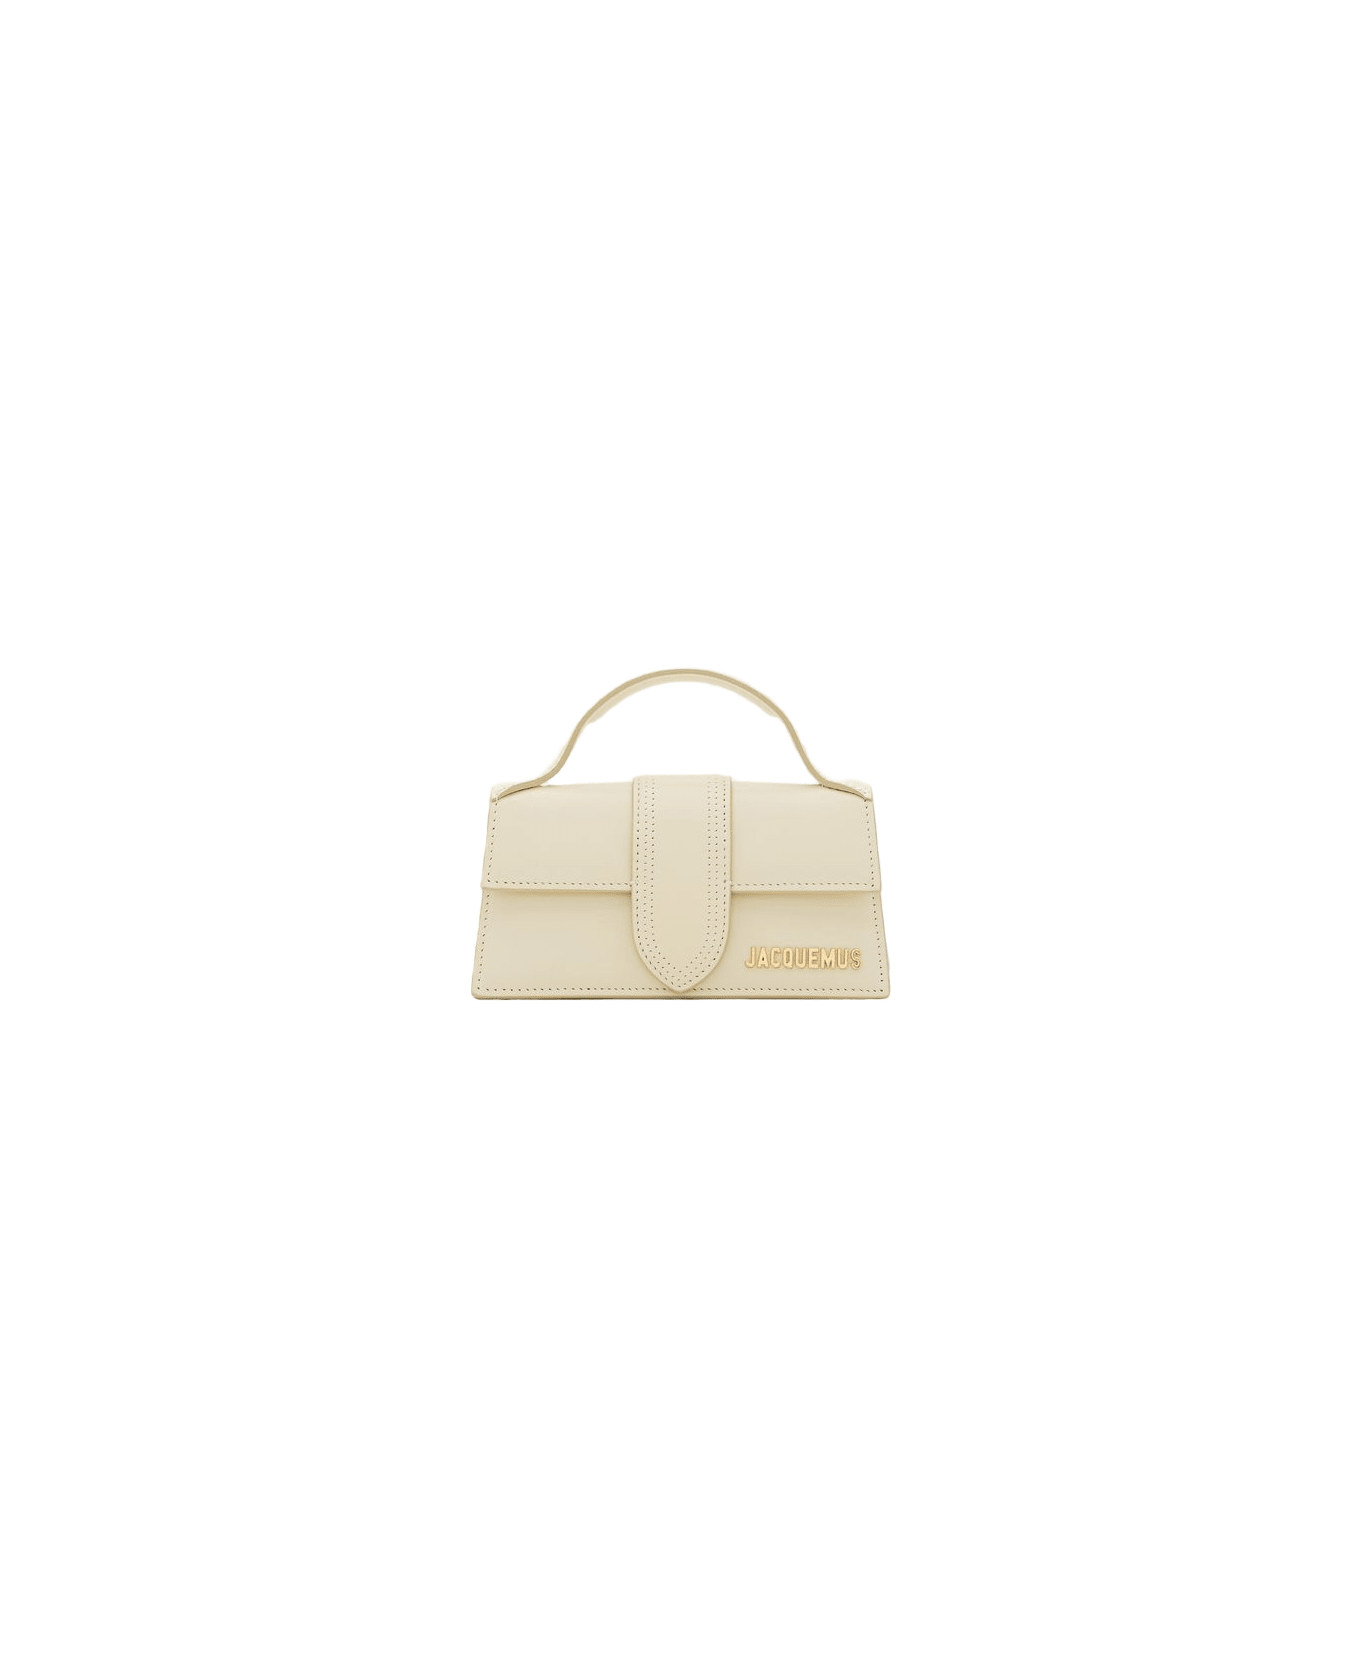 Jacquemus Le Bambino Leather Top Handle Bag - IVORY